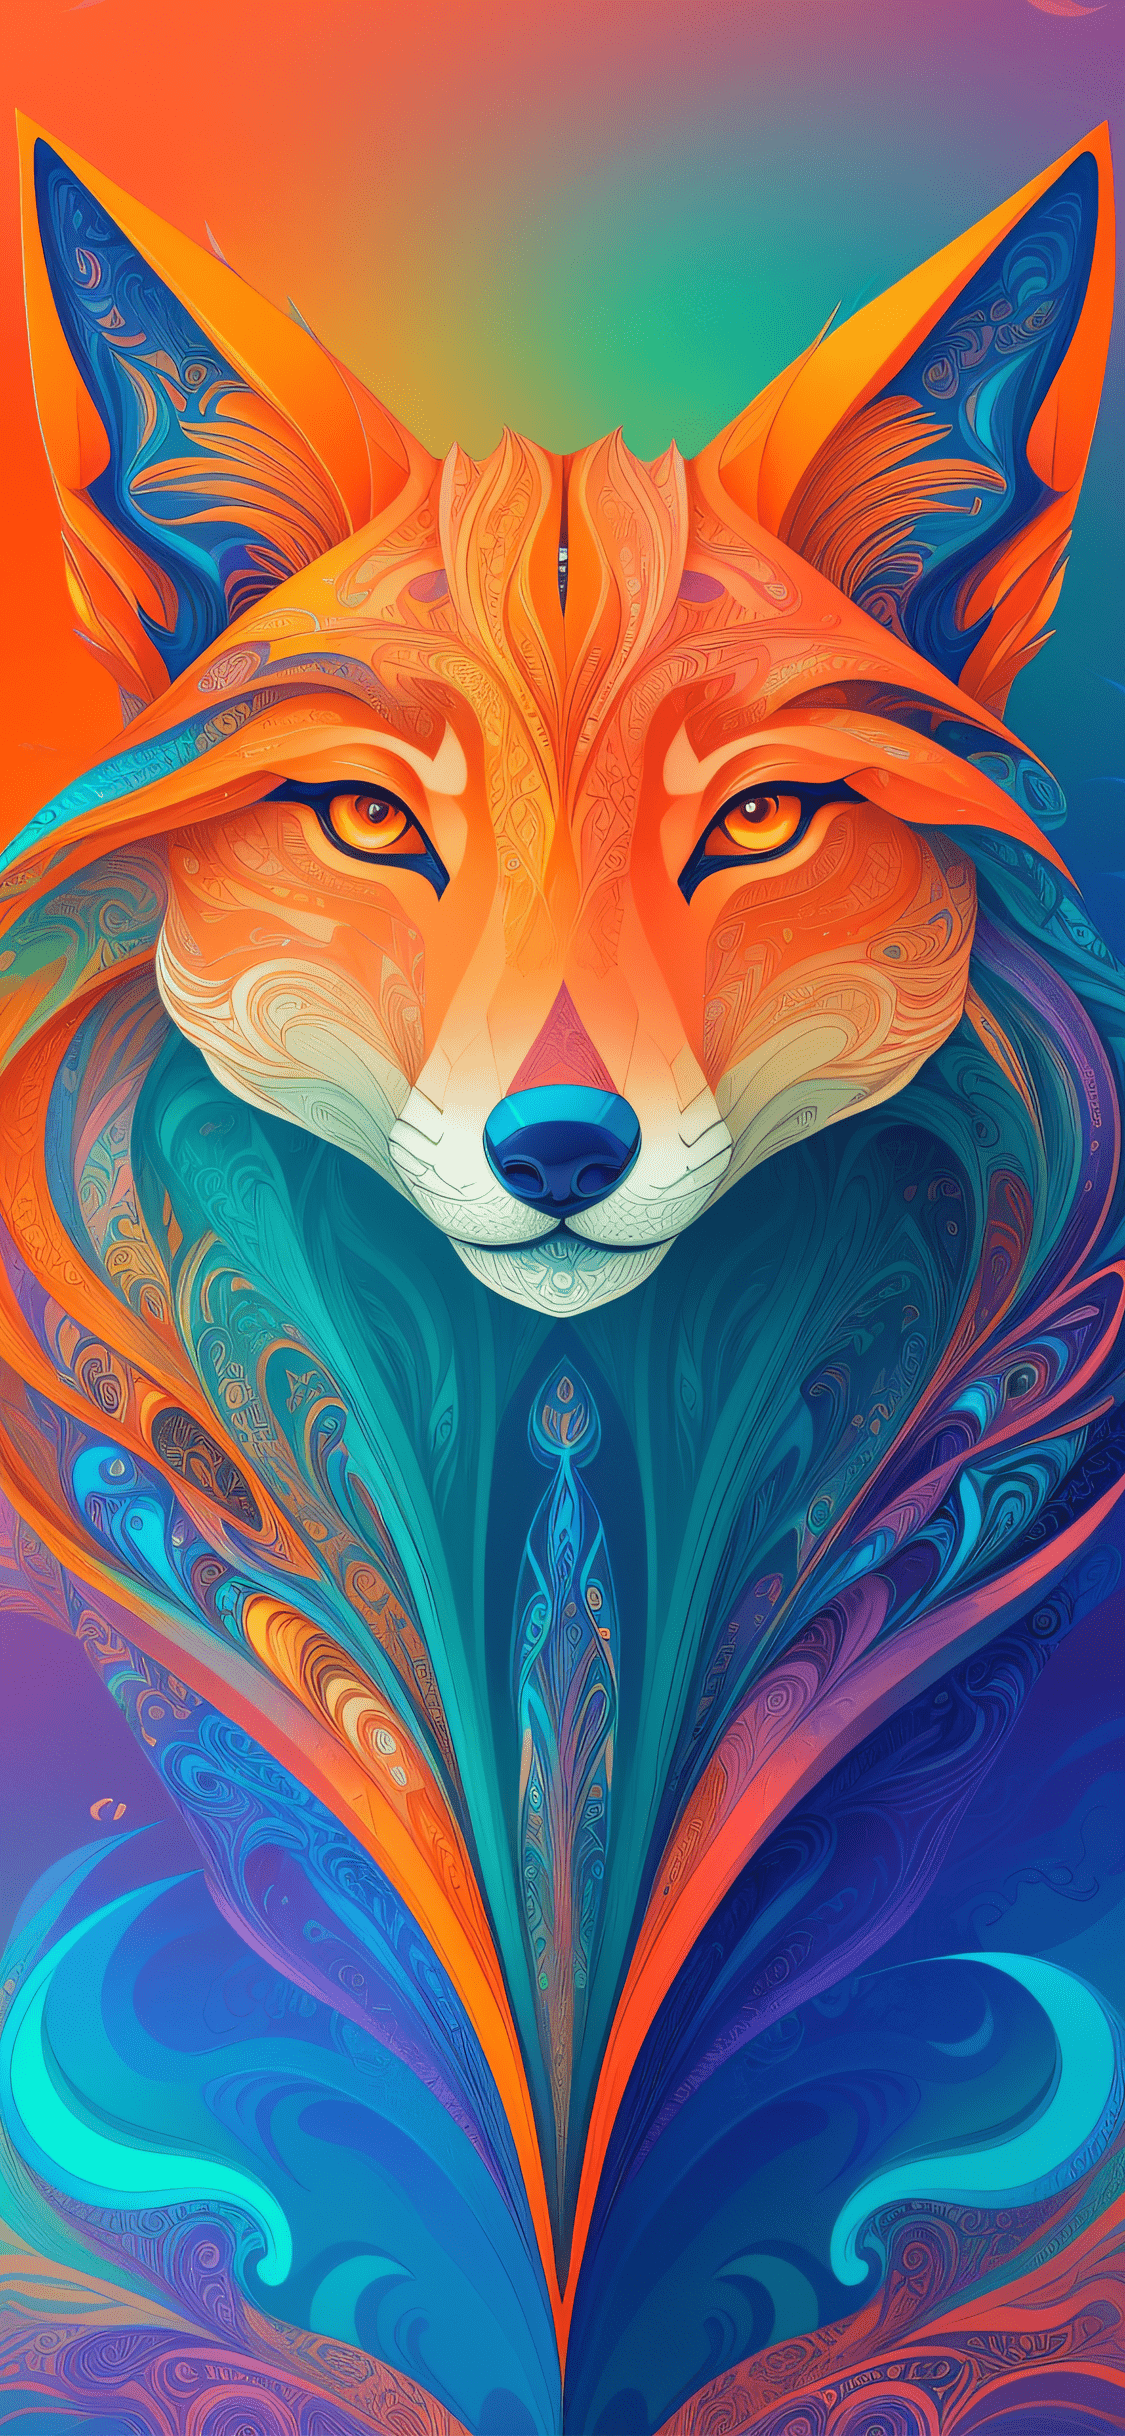 A colorful fox with an abstract design - Fox